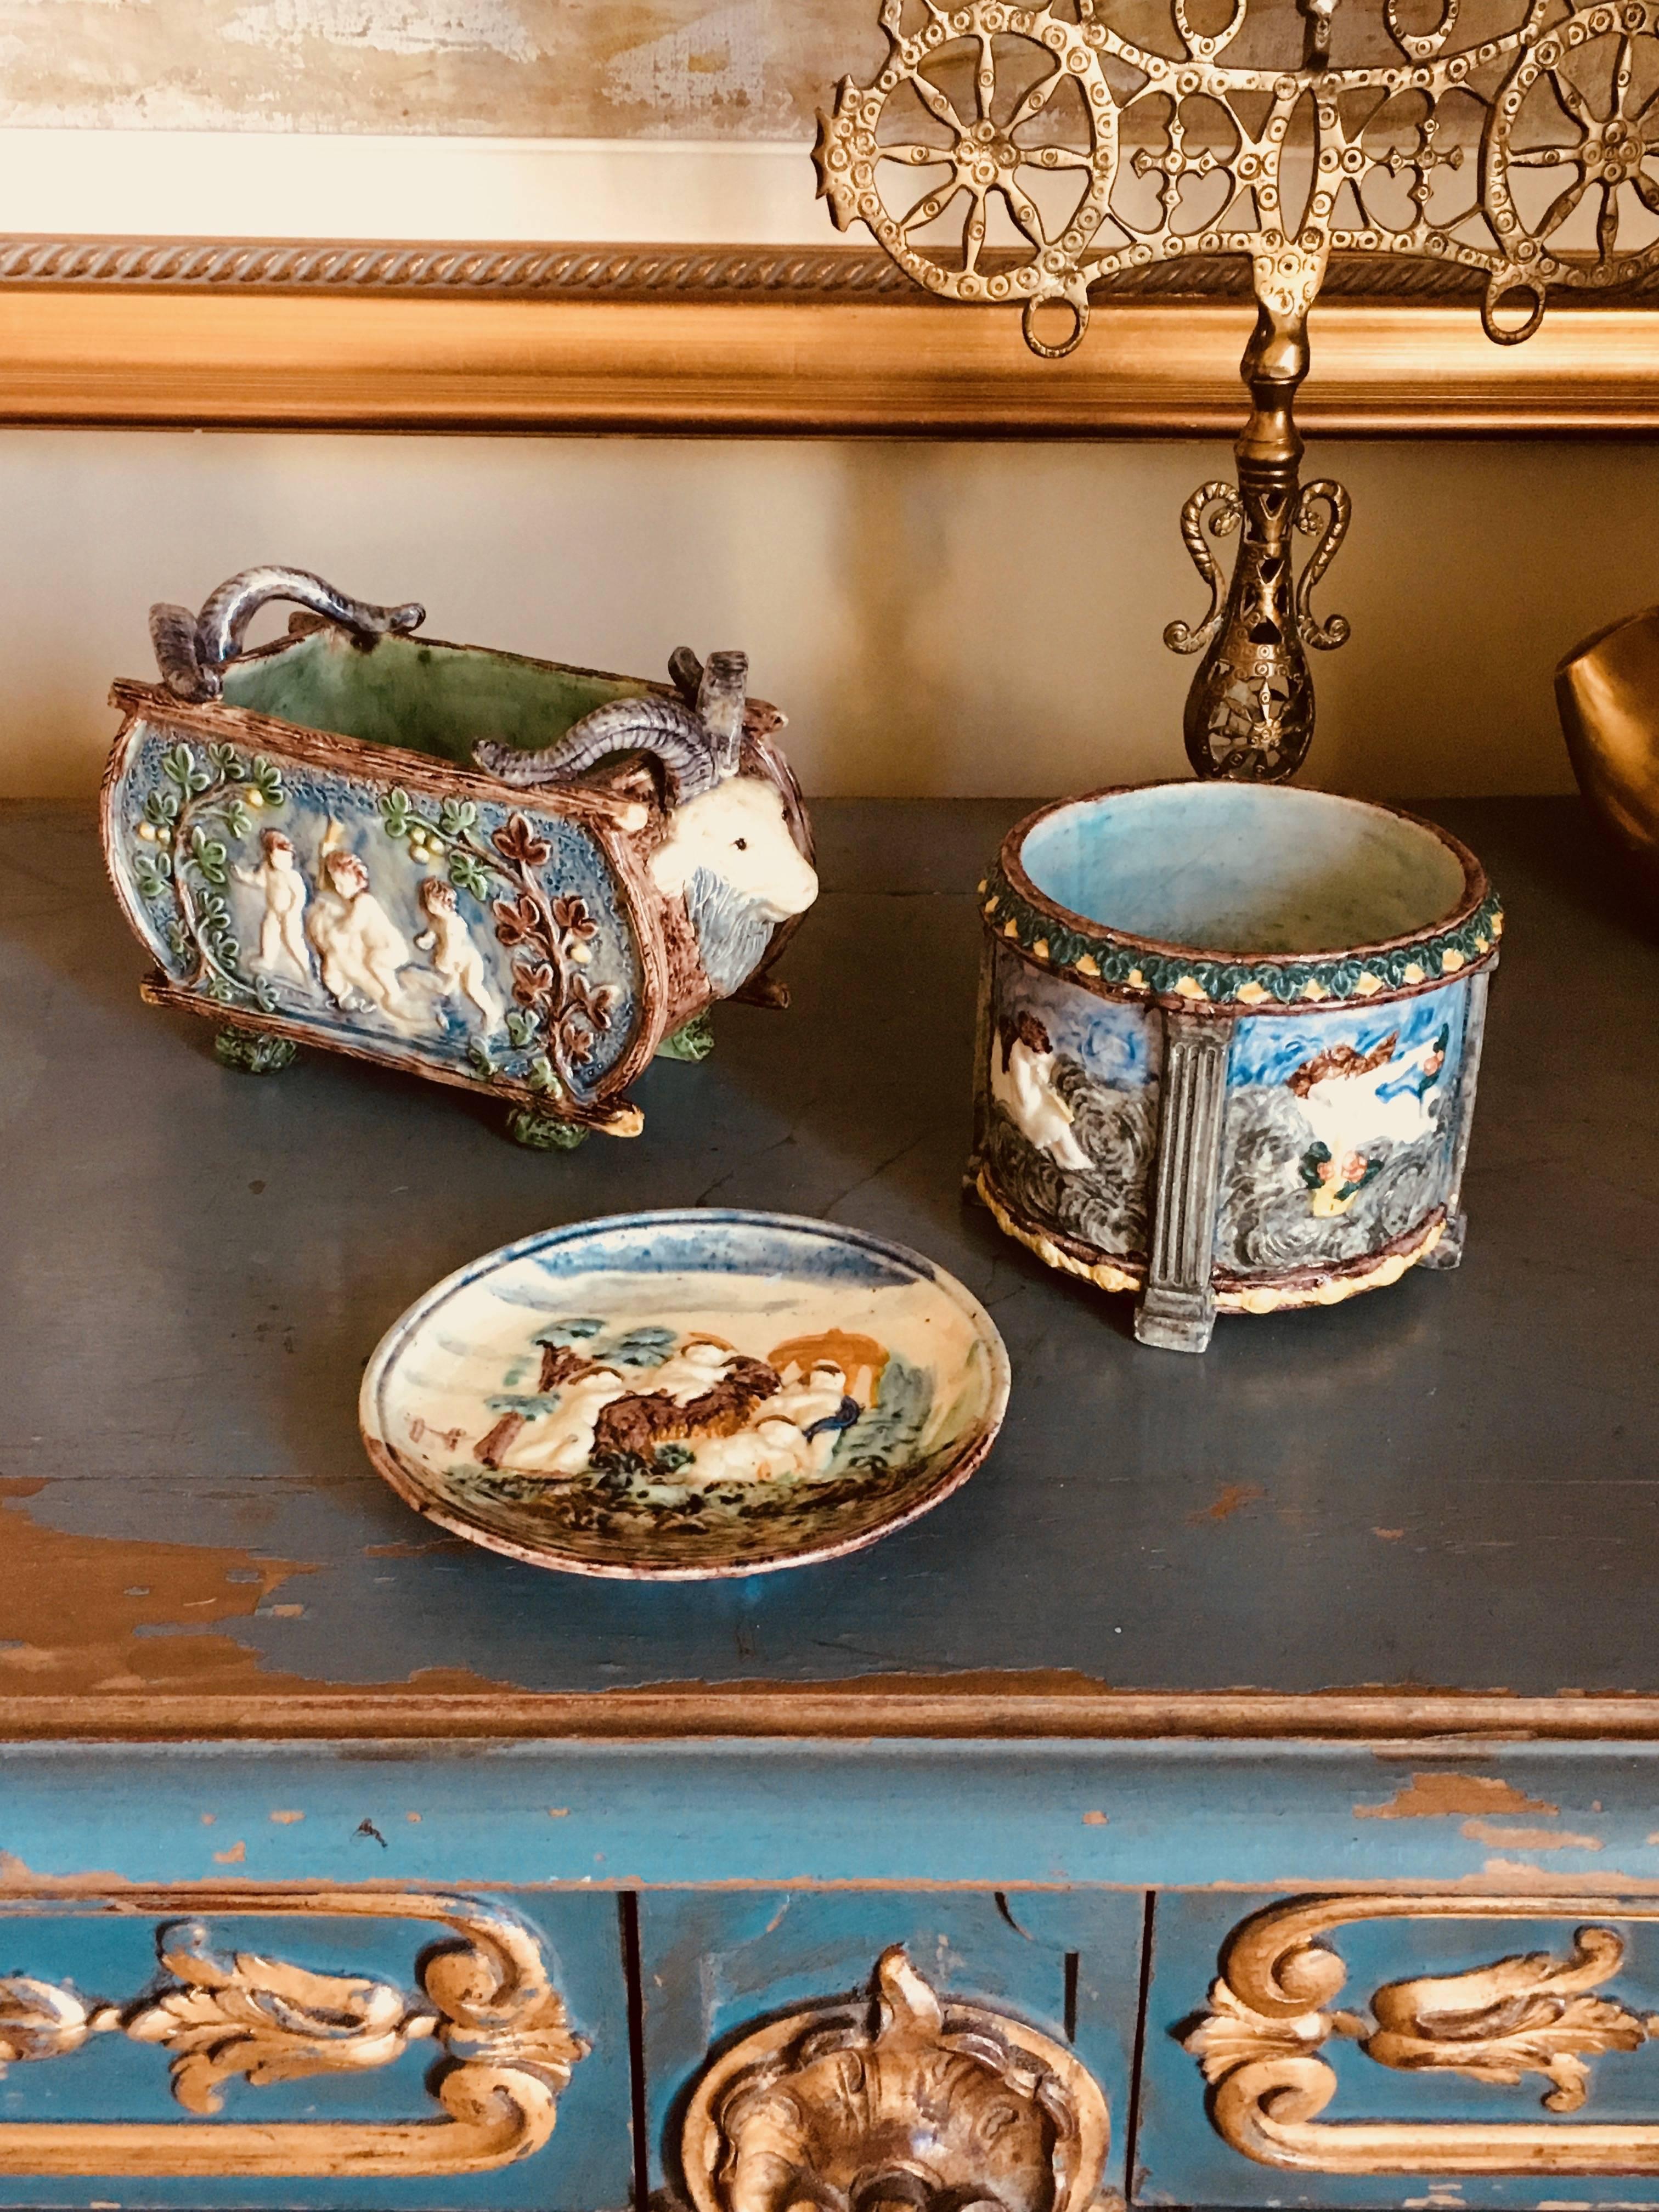 Late 19th century set of three beautiful barbotine ceramic pieces signed by Thomas Sergent (1830-1890). The set contains two jardinieres and a small plate, all of them in very good condition, lovely vivid colors and deep relief.
France, circa